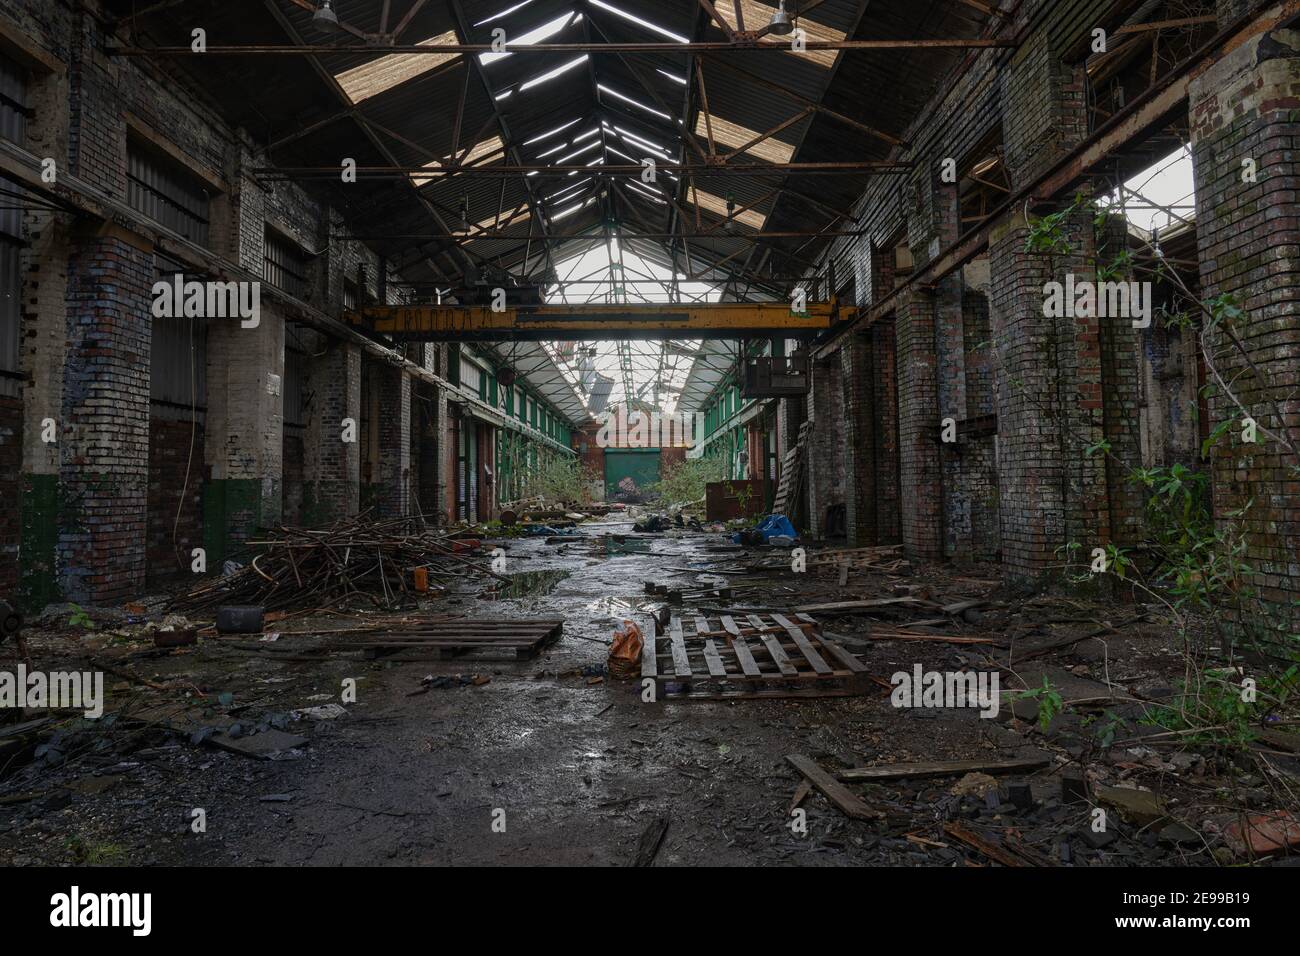 Old factory mill or warehouse abandoned and falling down Stock Photo